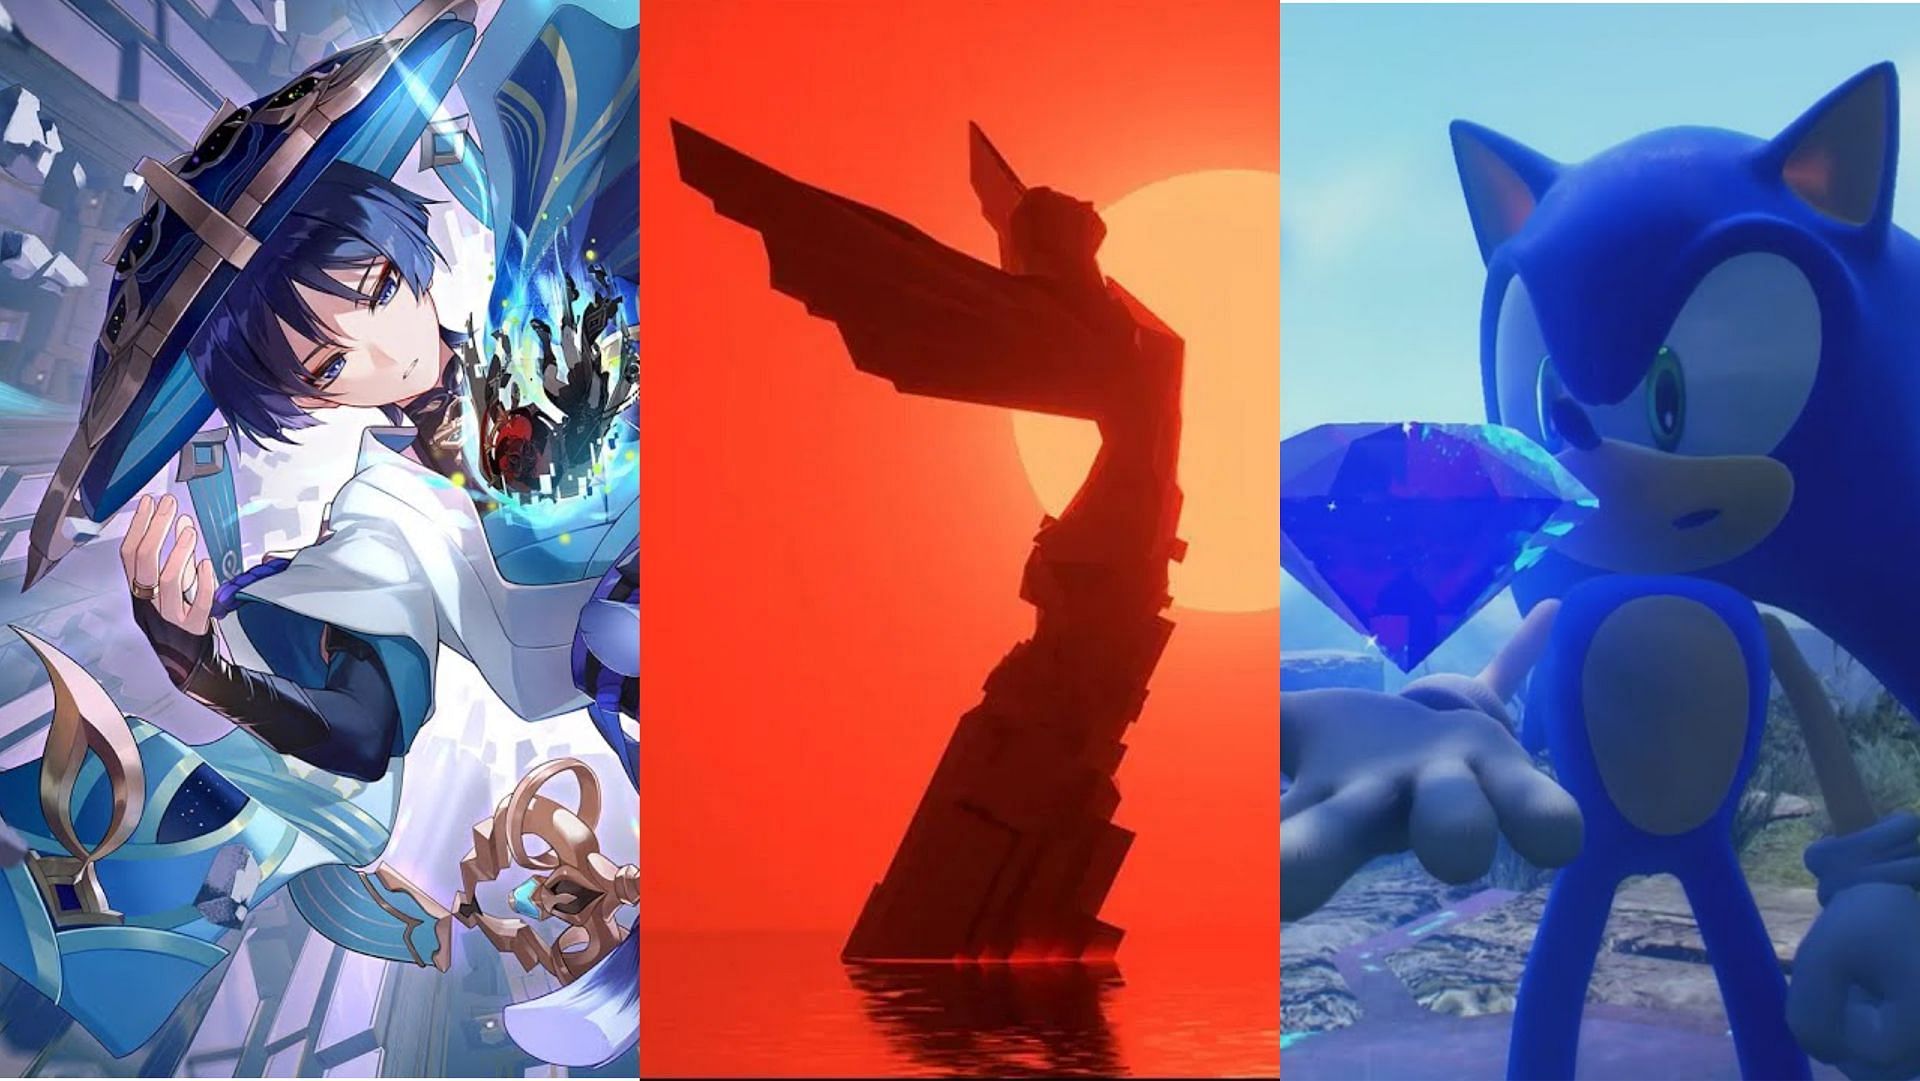 The Game Awards Fan Vote Has Genshin Impact and Sonic Frontiers